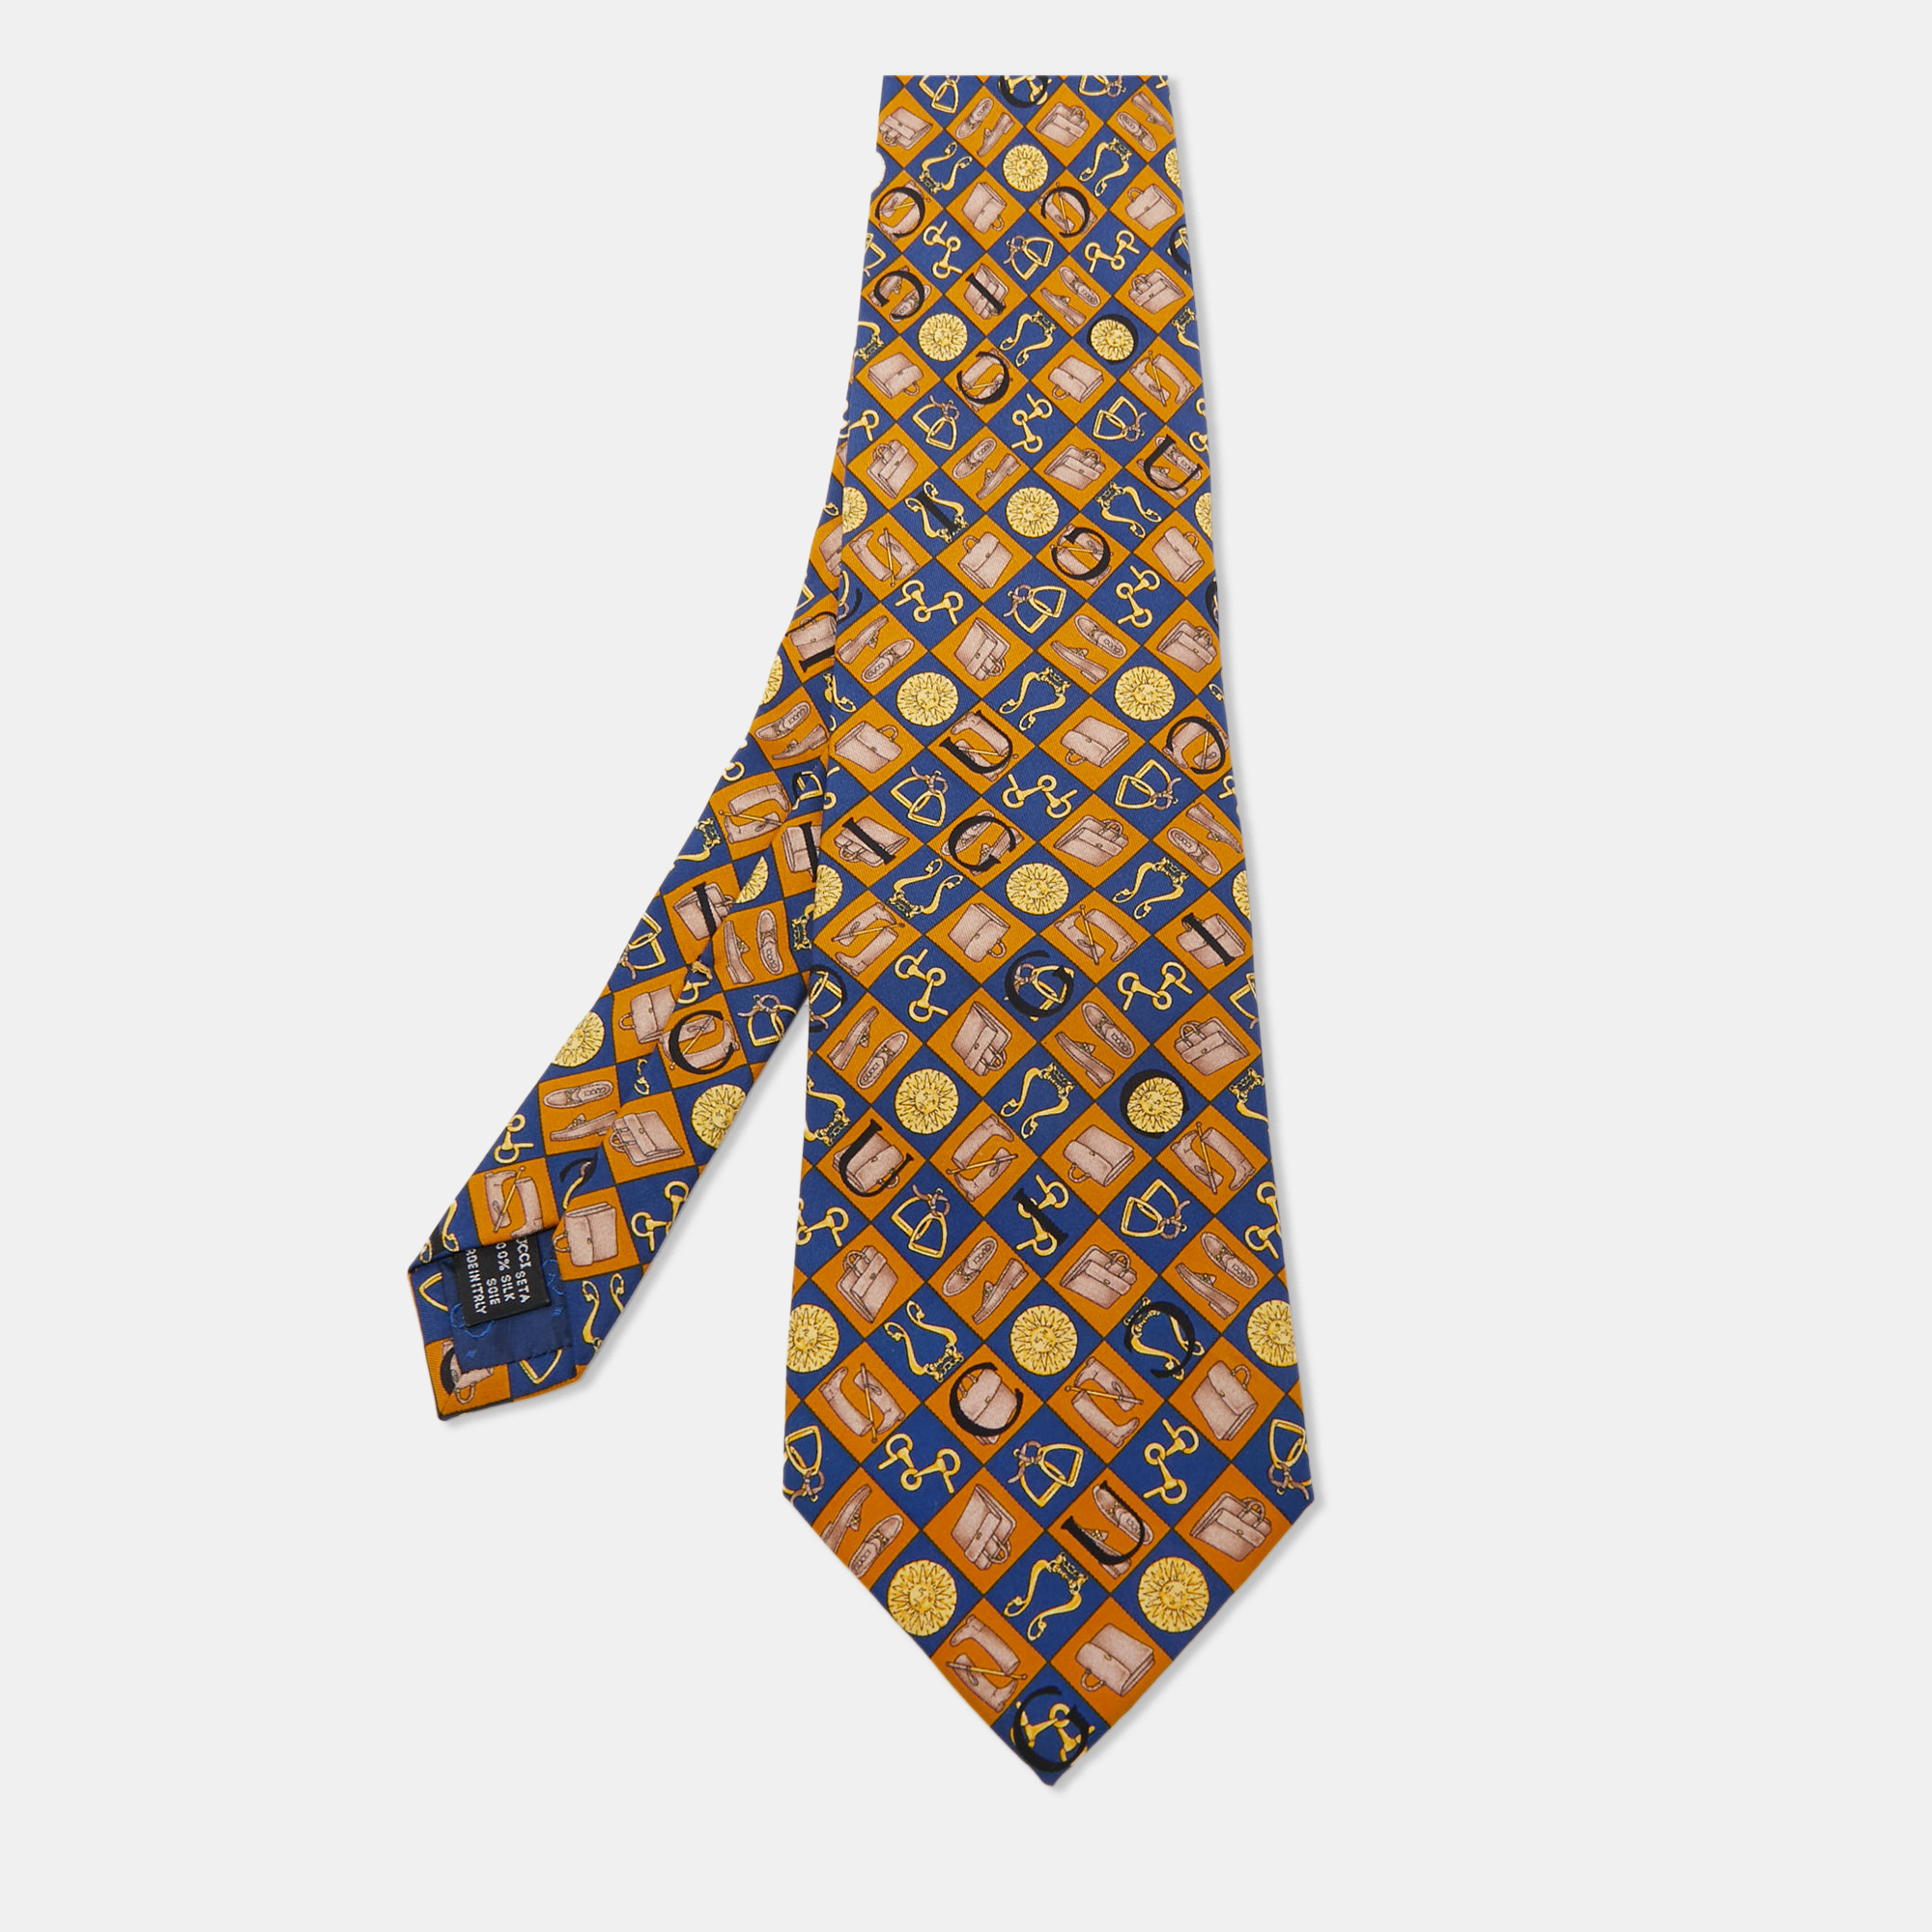 This tie is a perfect formal accessory that has a sharp and modern appeal. Made from luxurious materials it features intricate patterns and the brand label neatly stitched at the back. It is sure to add oodles of style to your blazers.